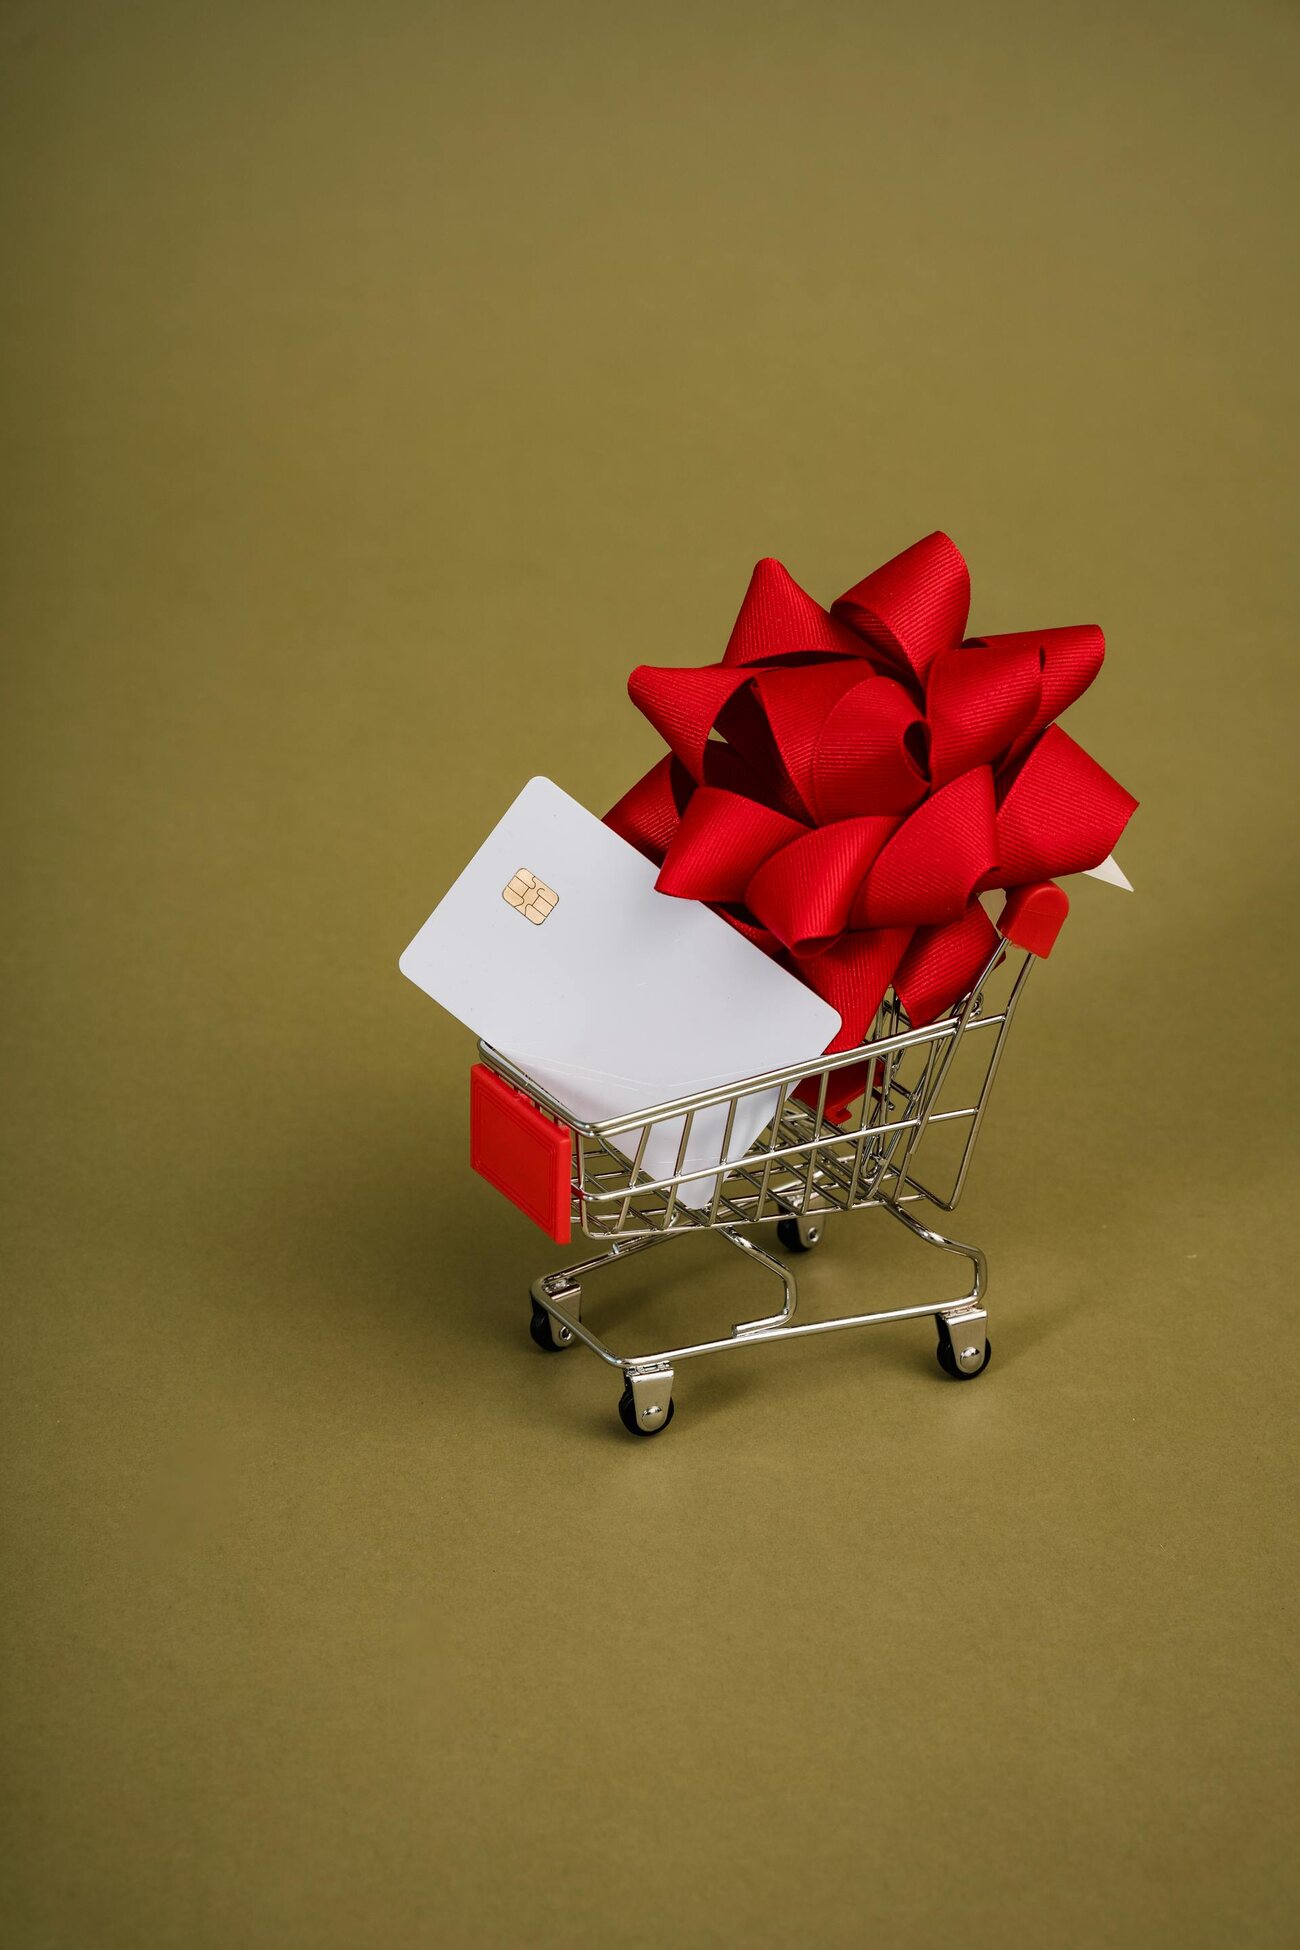 A credit card with a red bow in a miniature shopping cart on a green background